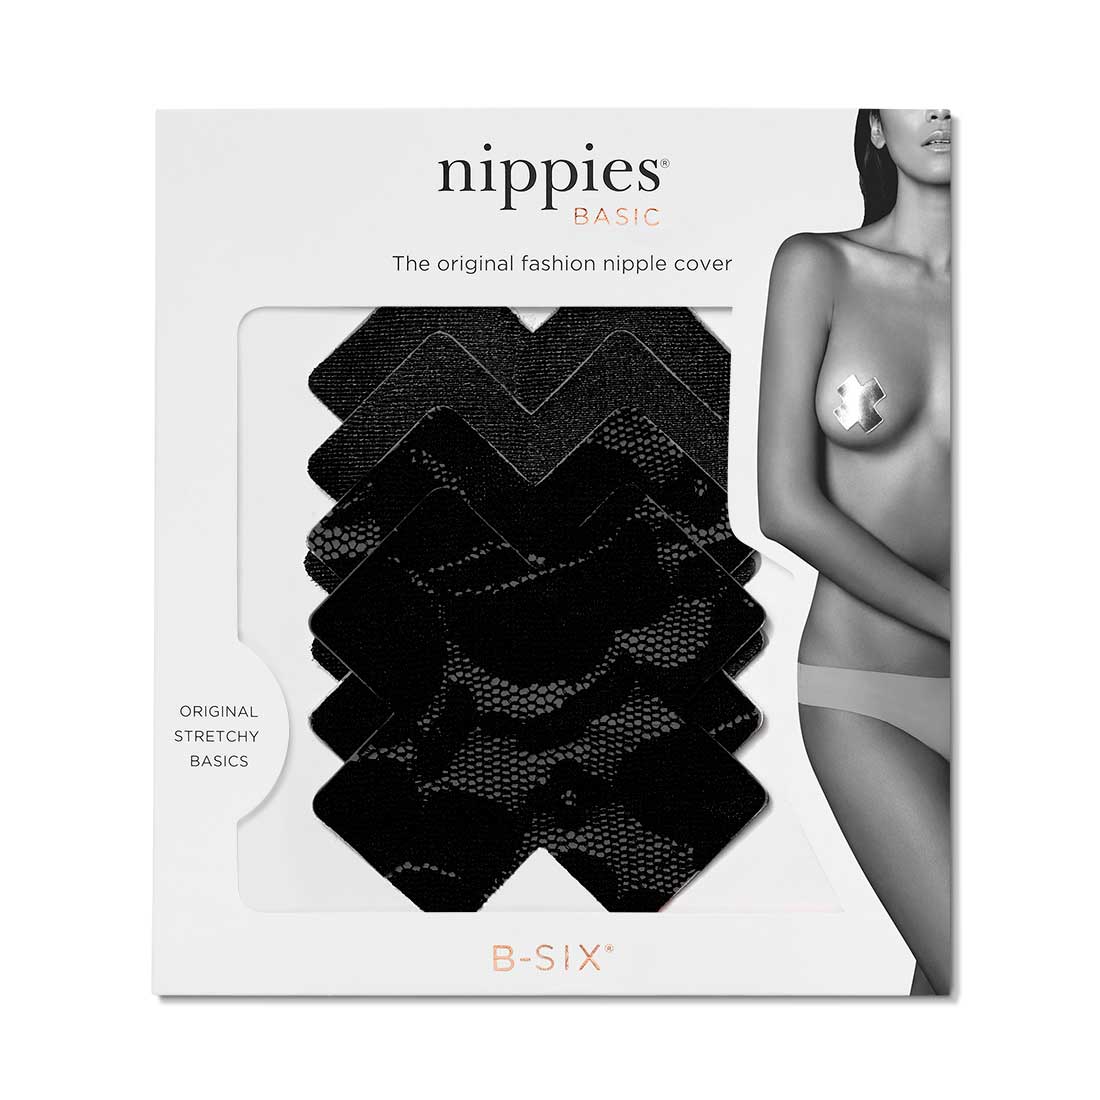 Nippies Basics in Creme – Shades of Grey Boutique